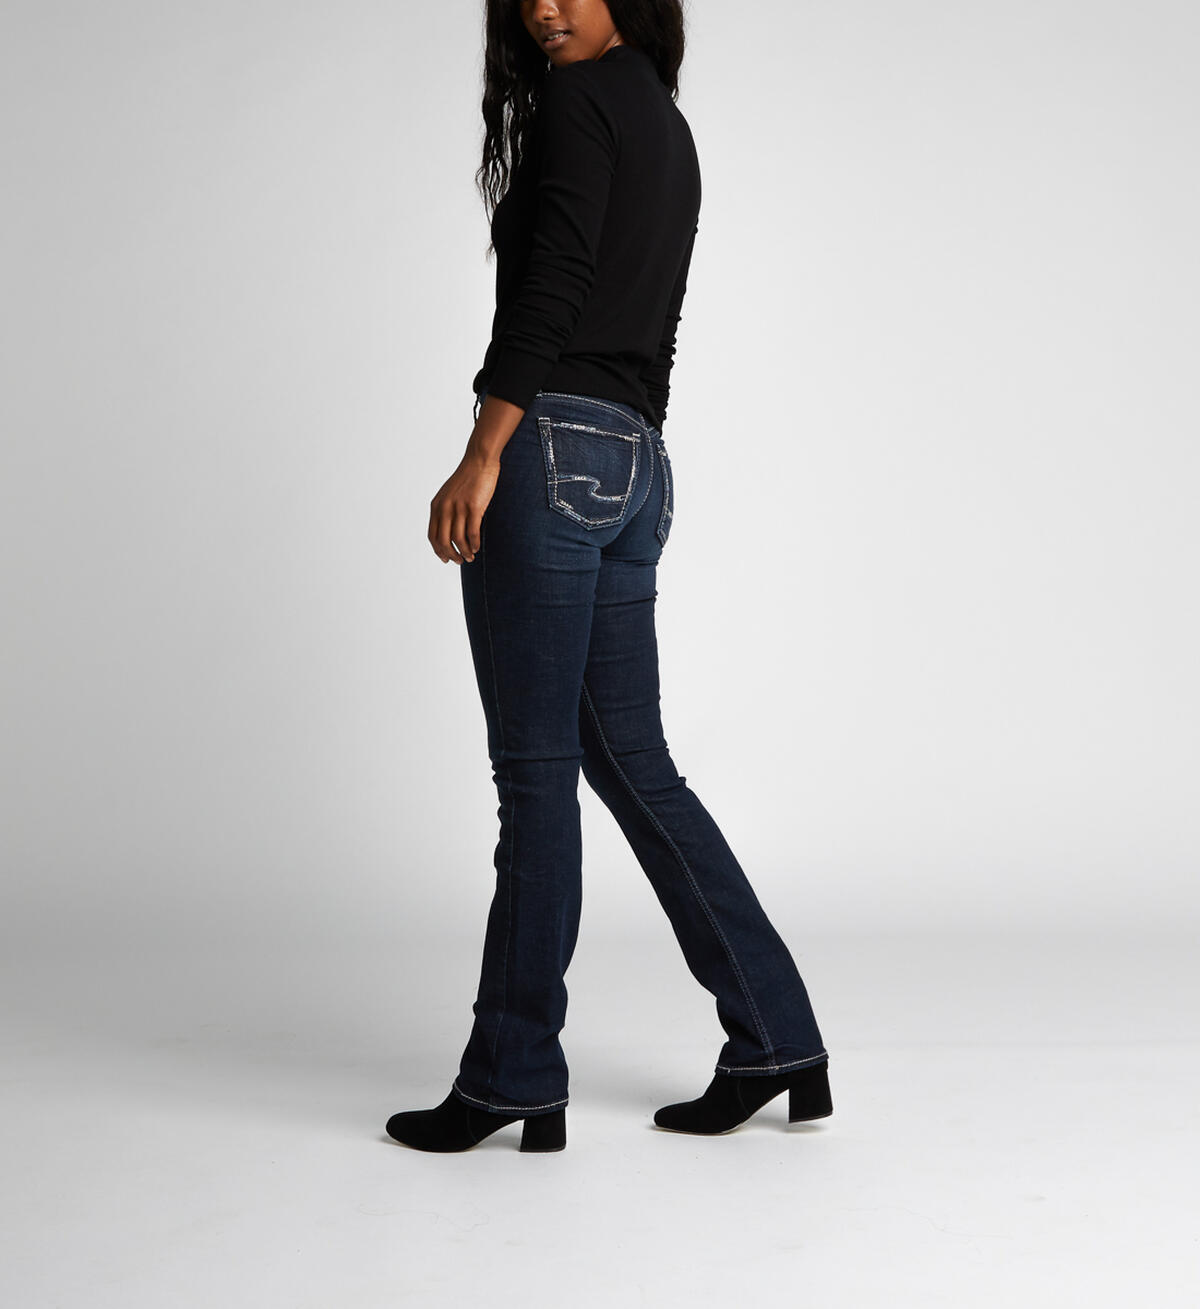 Avery High-Rise Curvy Slim Bootcut Jeans, , hi-res image number 2